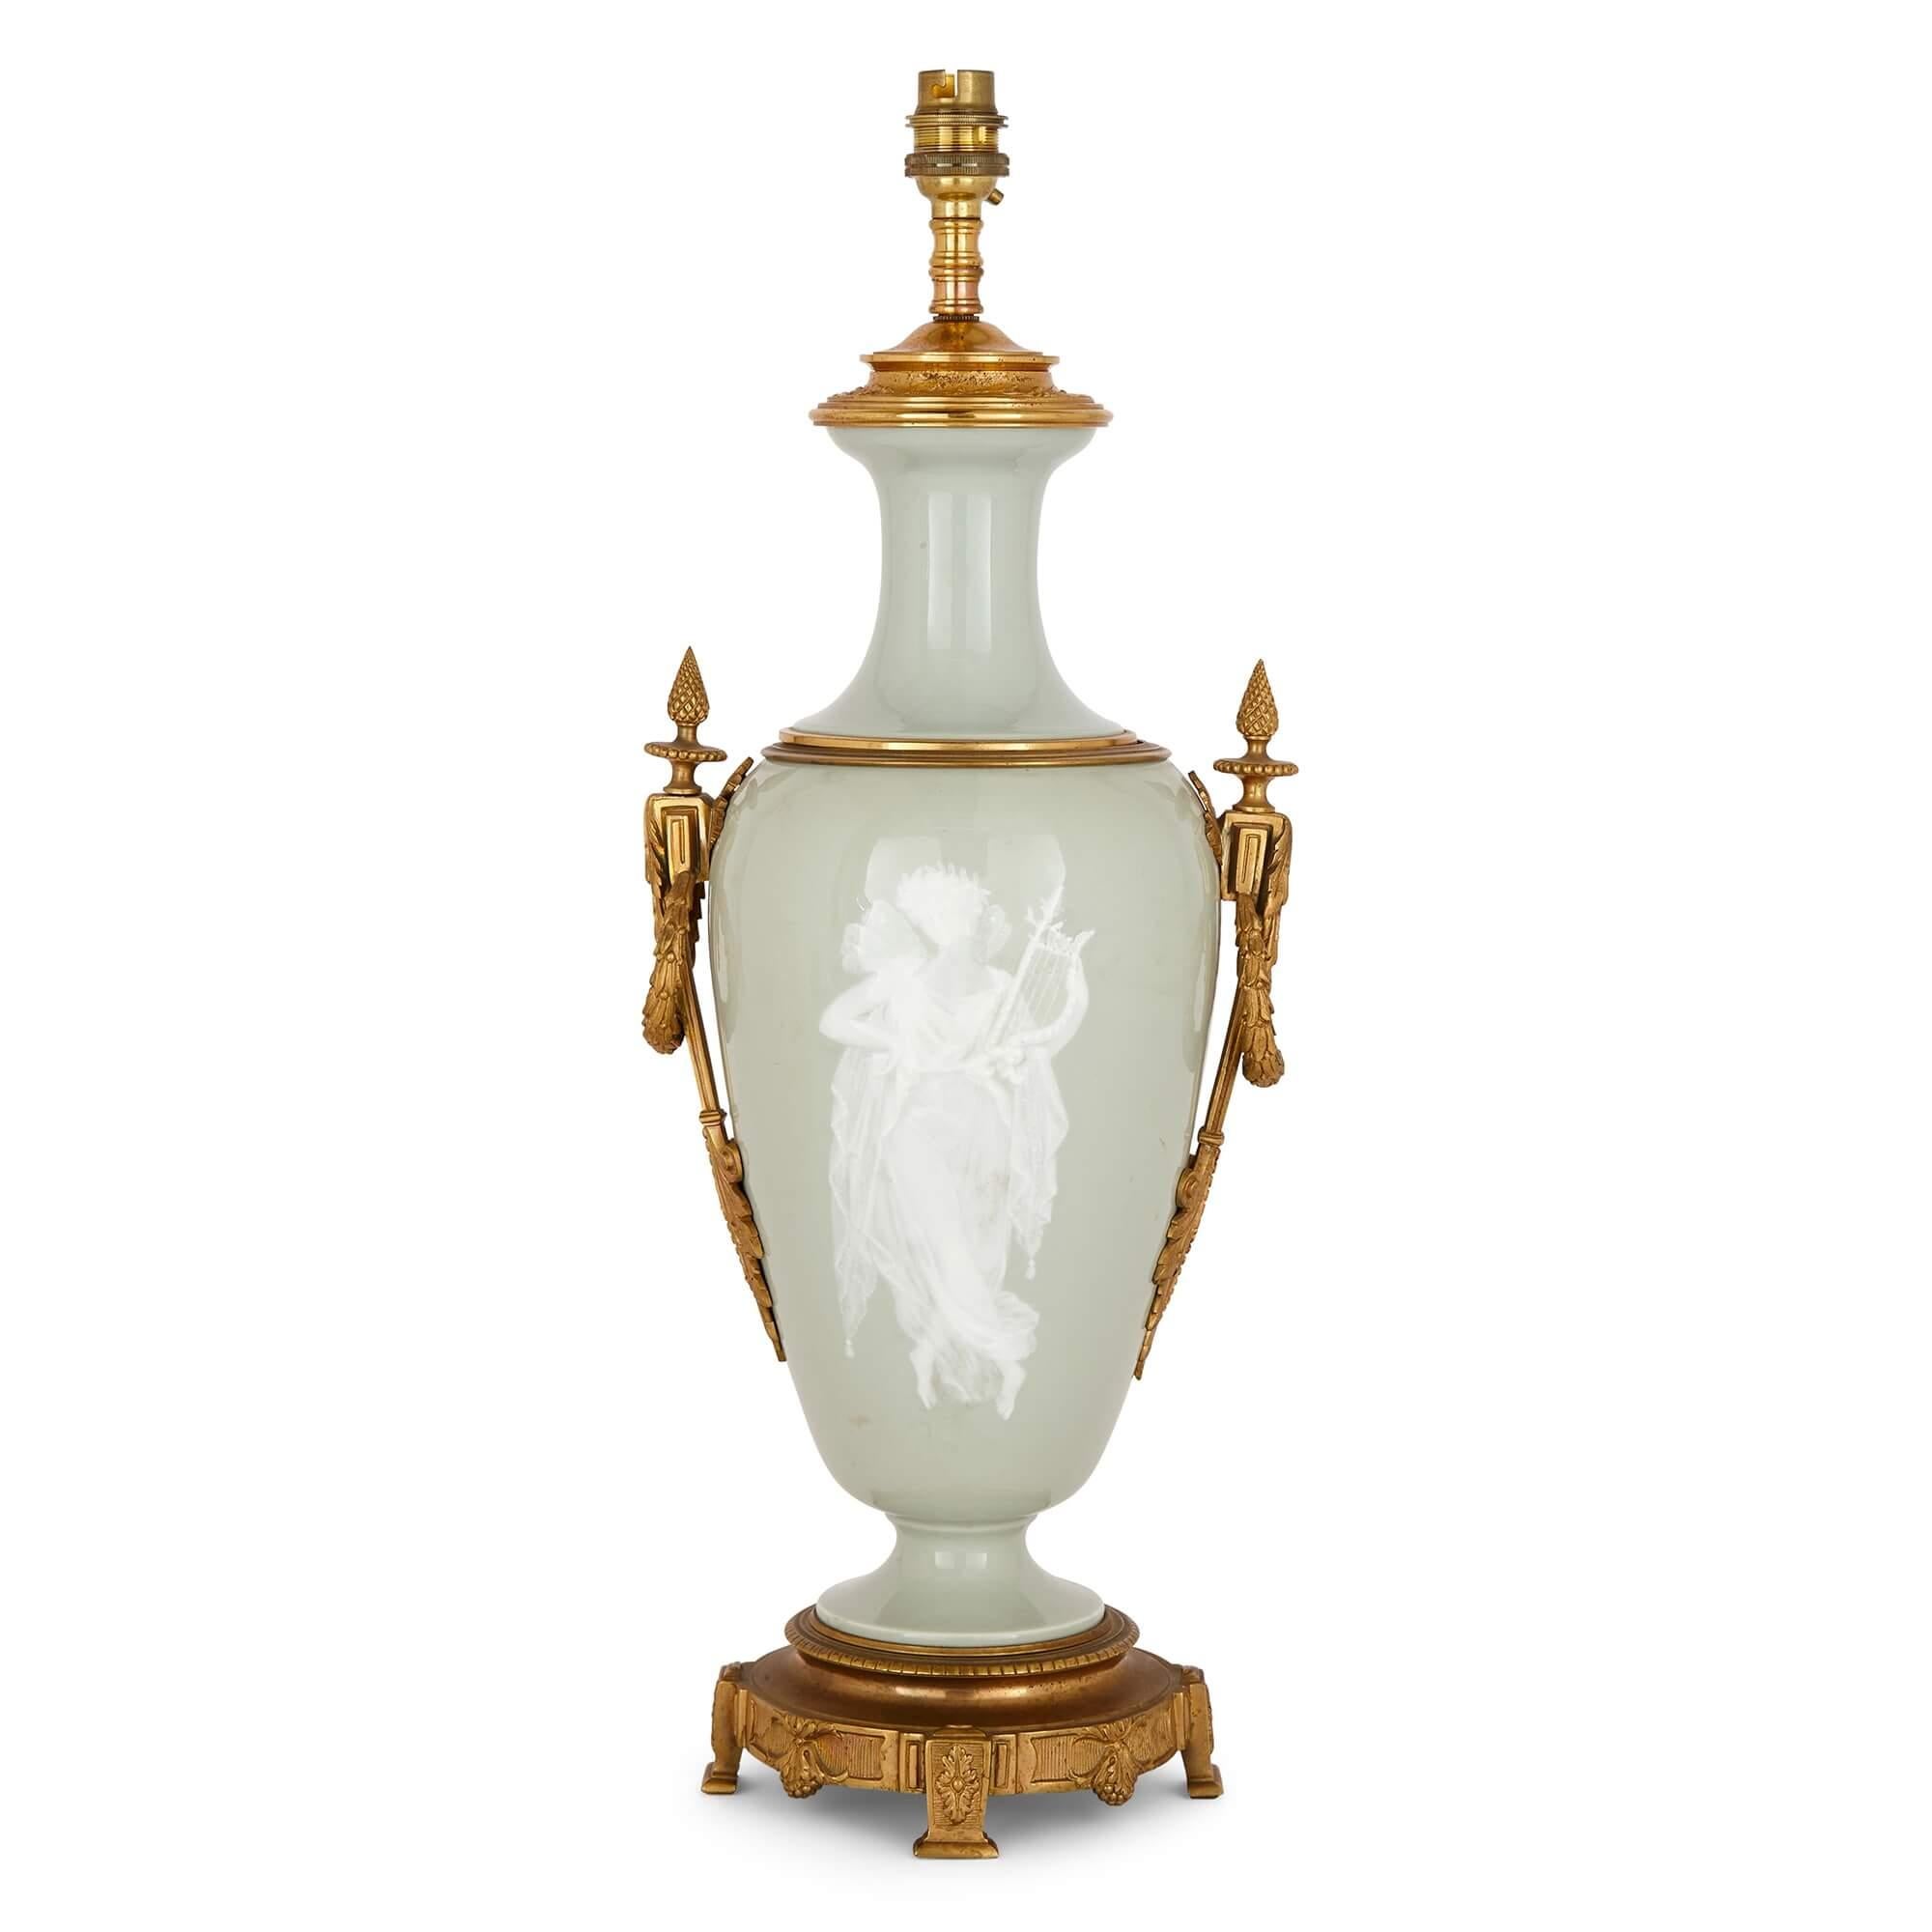 Ormolu mounted Celadon Porcelain Pâte-sur-pâte vase-form lamp
French, late 19th century
Measures: Height 54cm, width 21cm, depth 17cm

Consisting of gilt bronze mounts atop pâte-sur-pâte celadon porcelain, this beautiful lamp base, with a